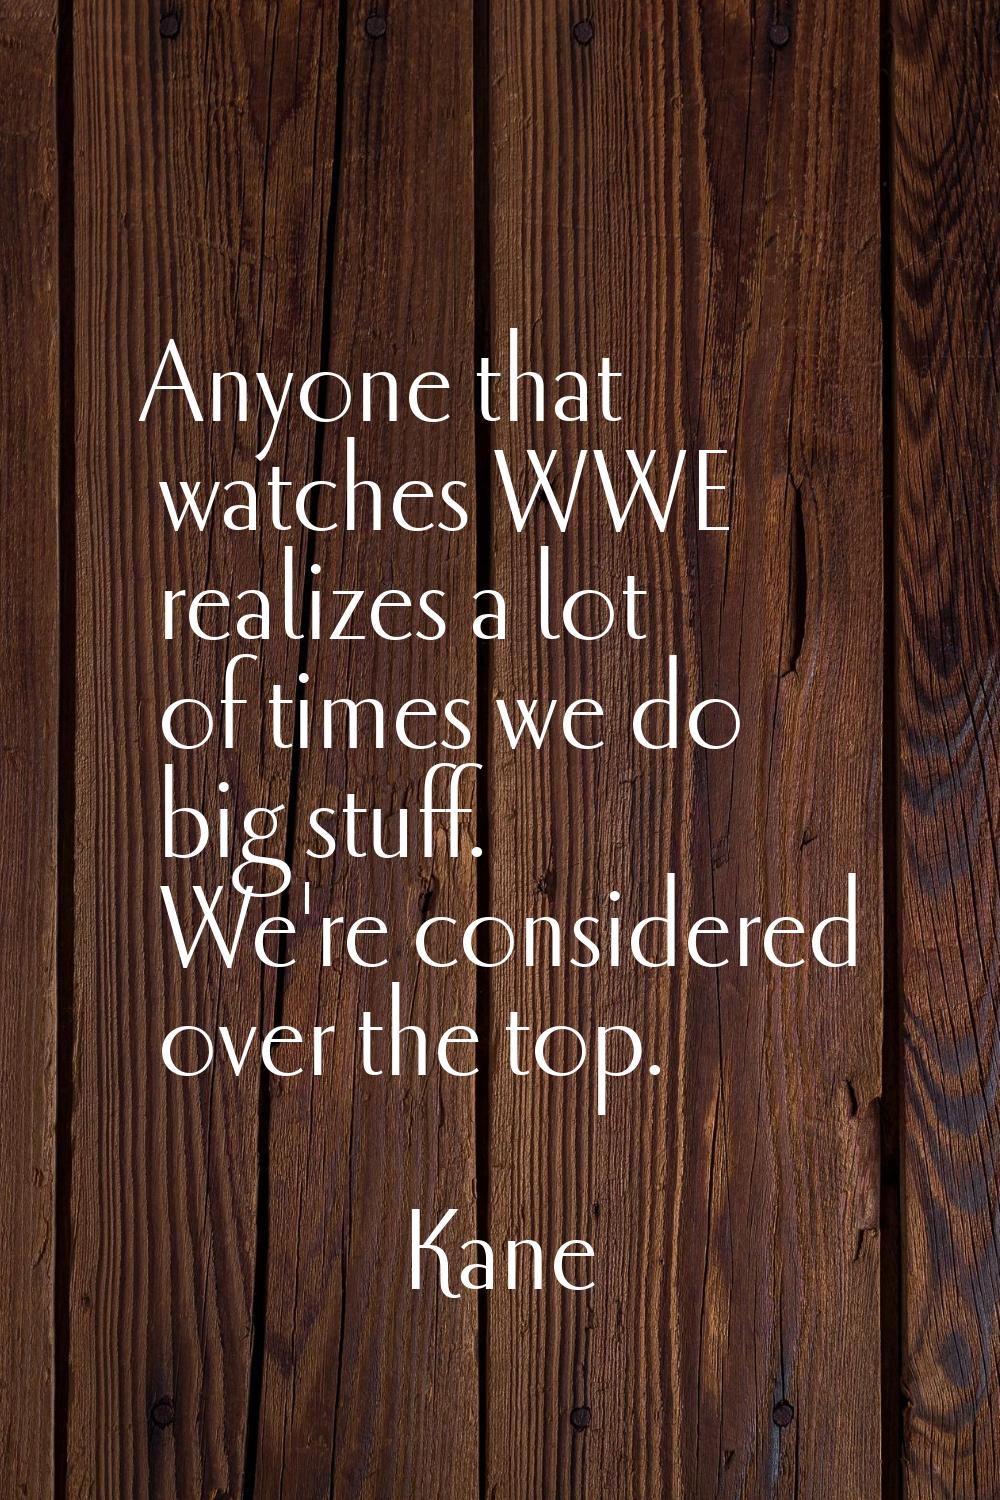 Anyone that watches WWE realizes a lot of times we do big stuff. We're considered over the top.